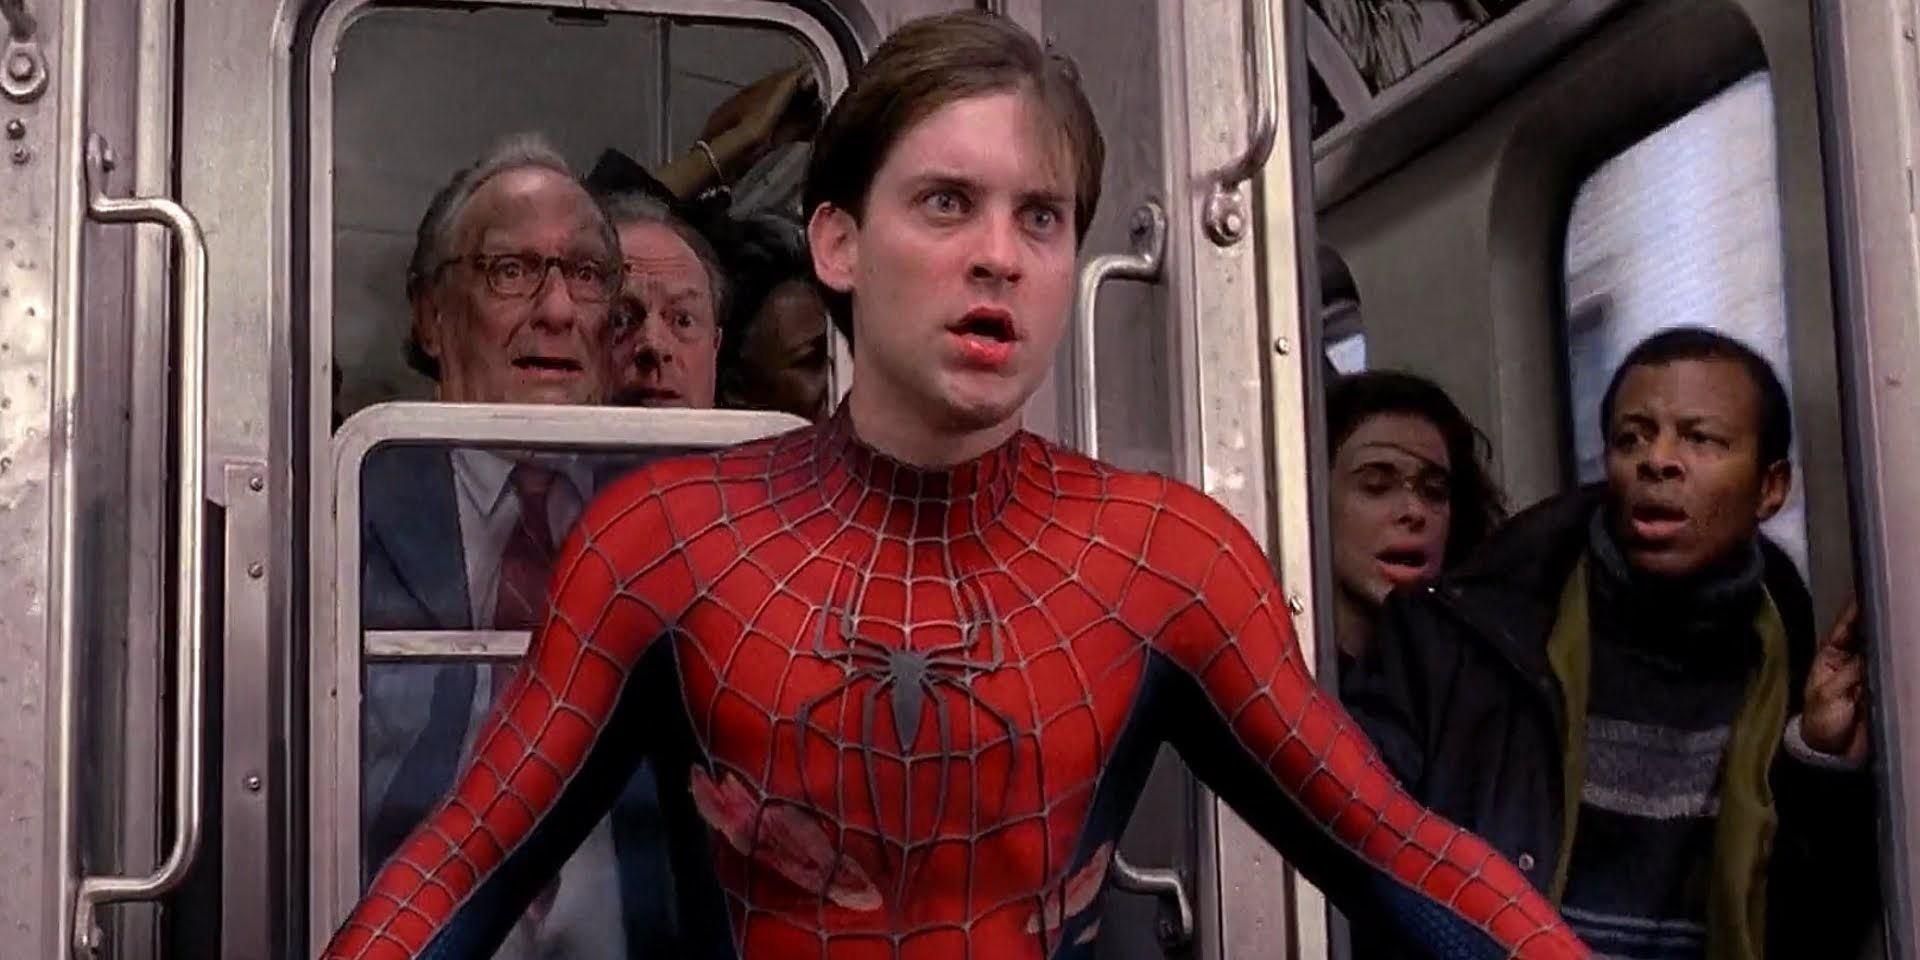 Spider-Man stands on the front of a train in Spider-Man 2